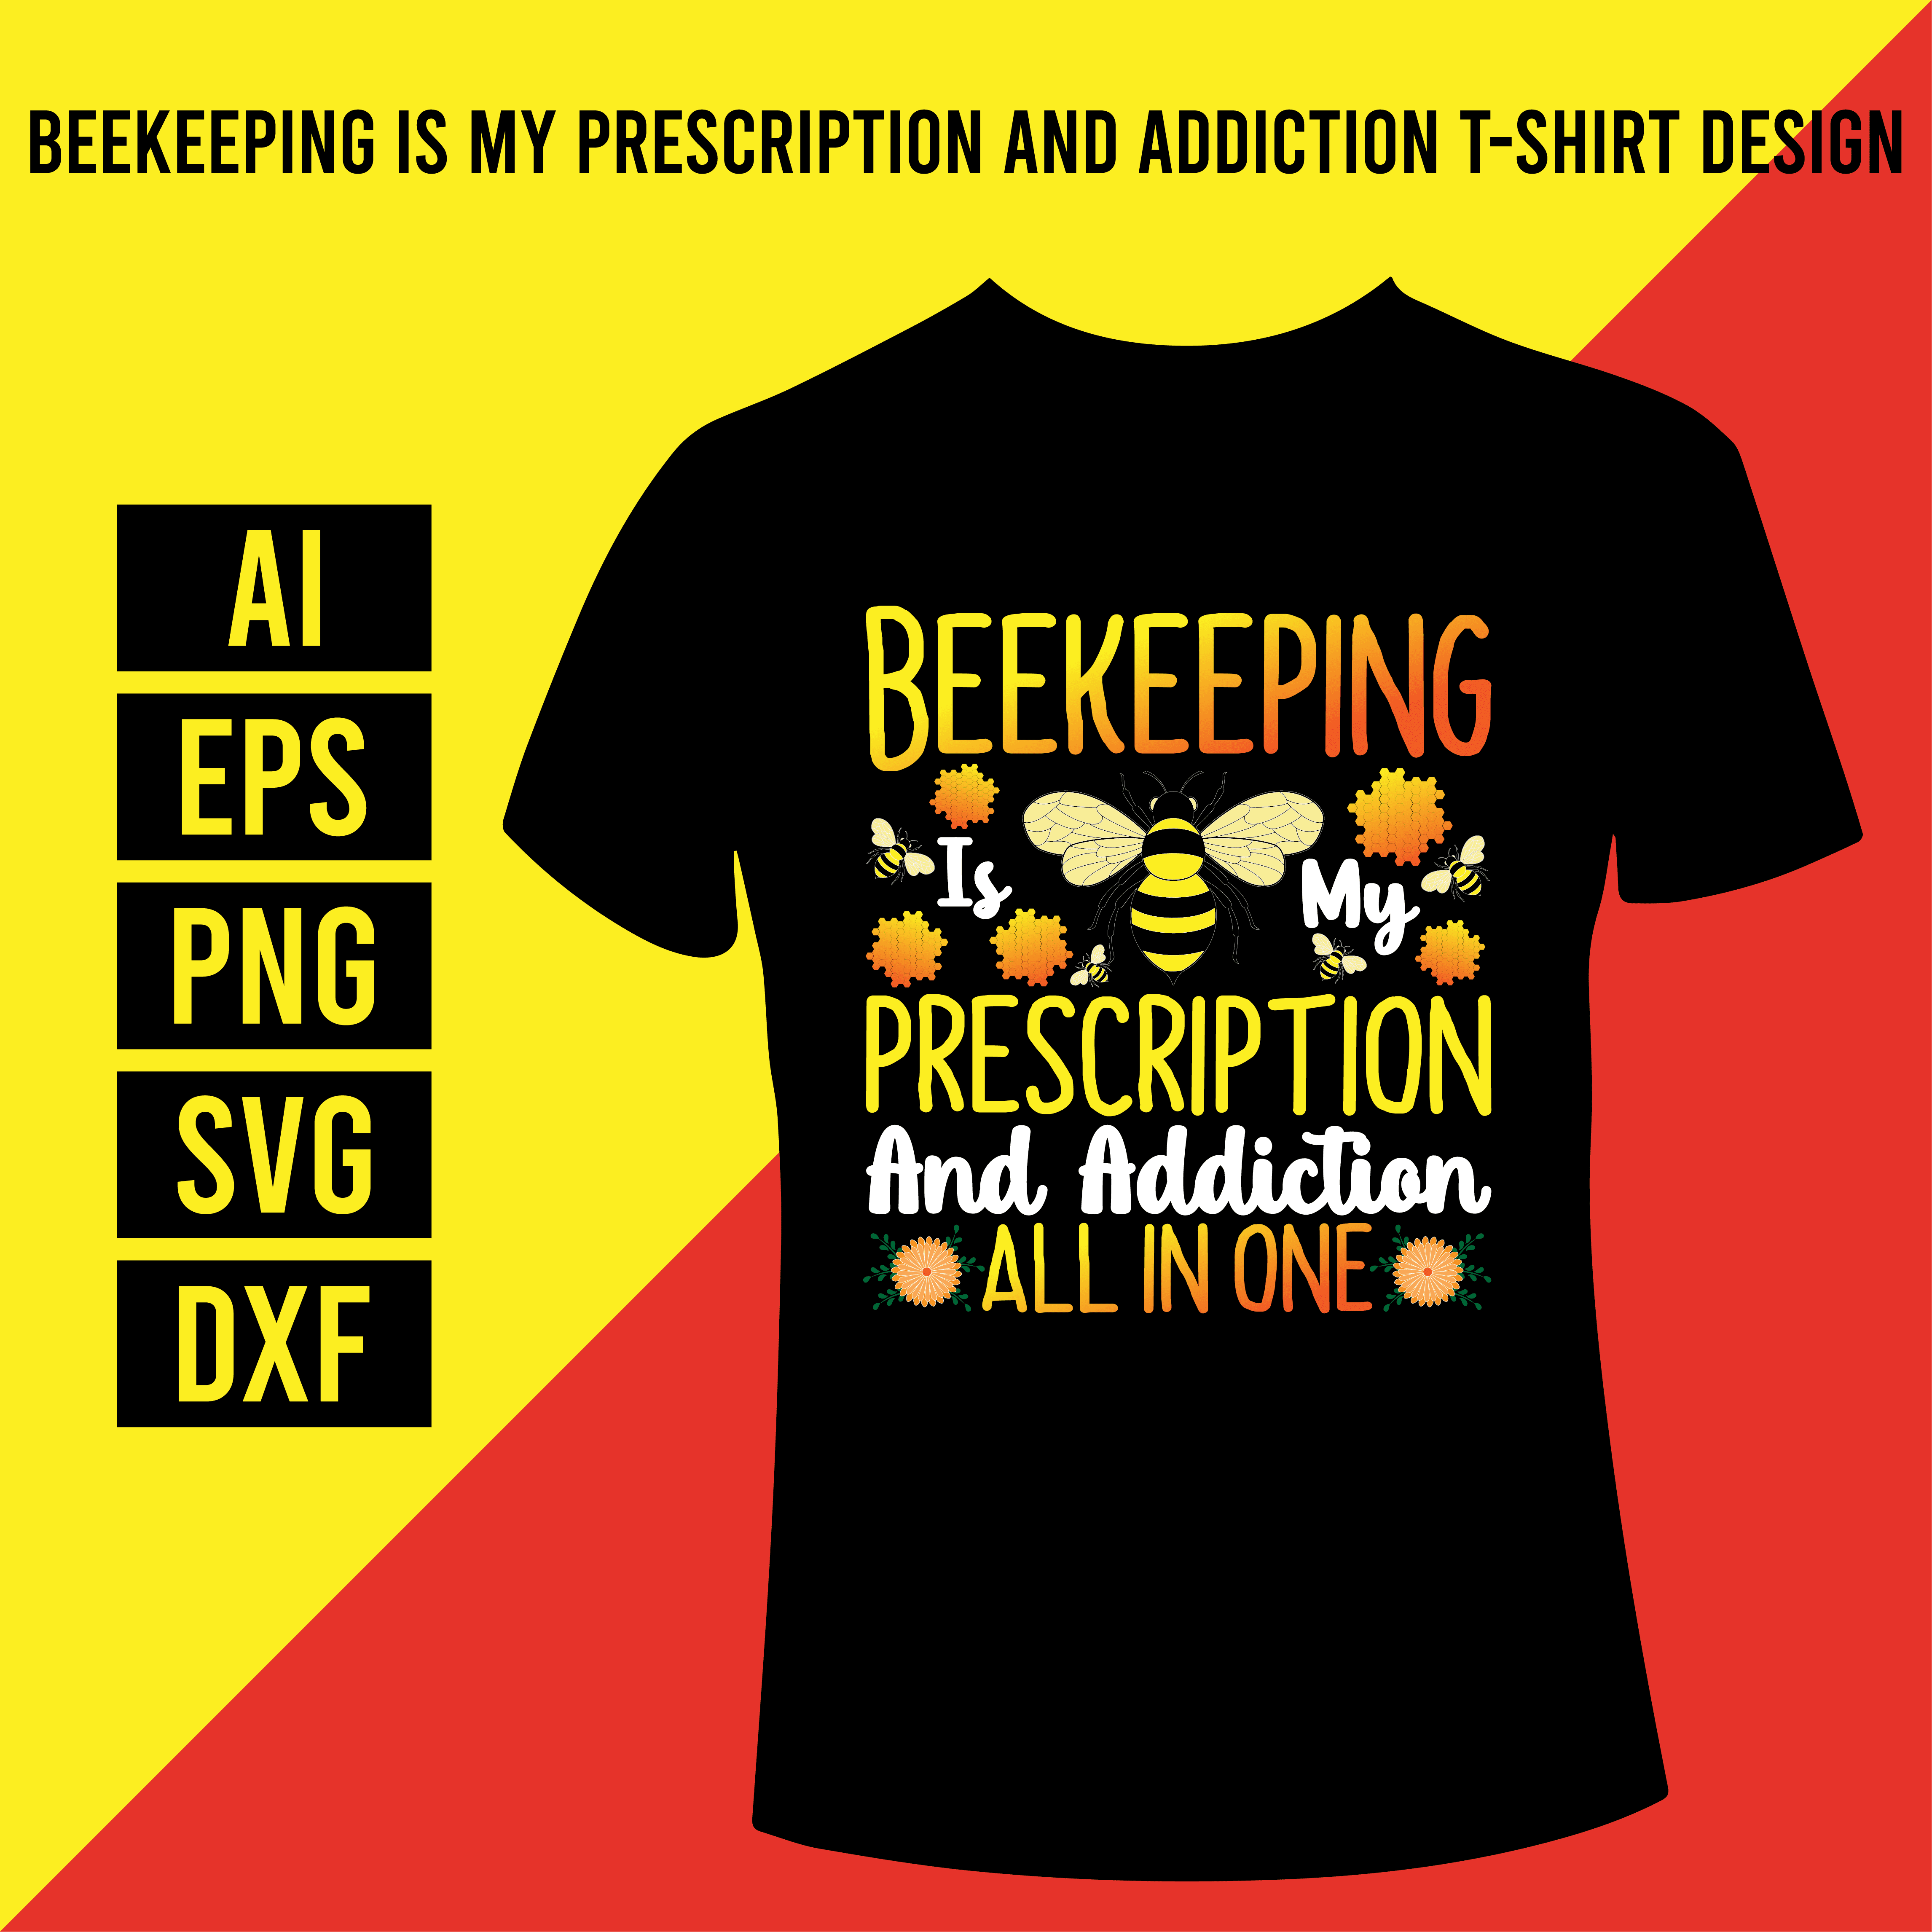 Beekeeping Is My Prescription And Addiction T- Shirt Design main cover.